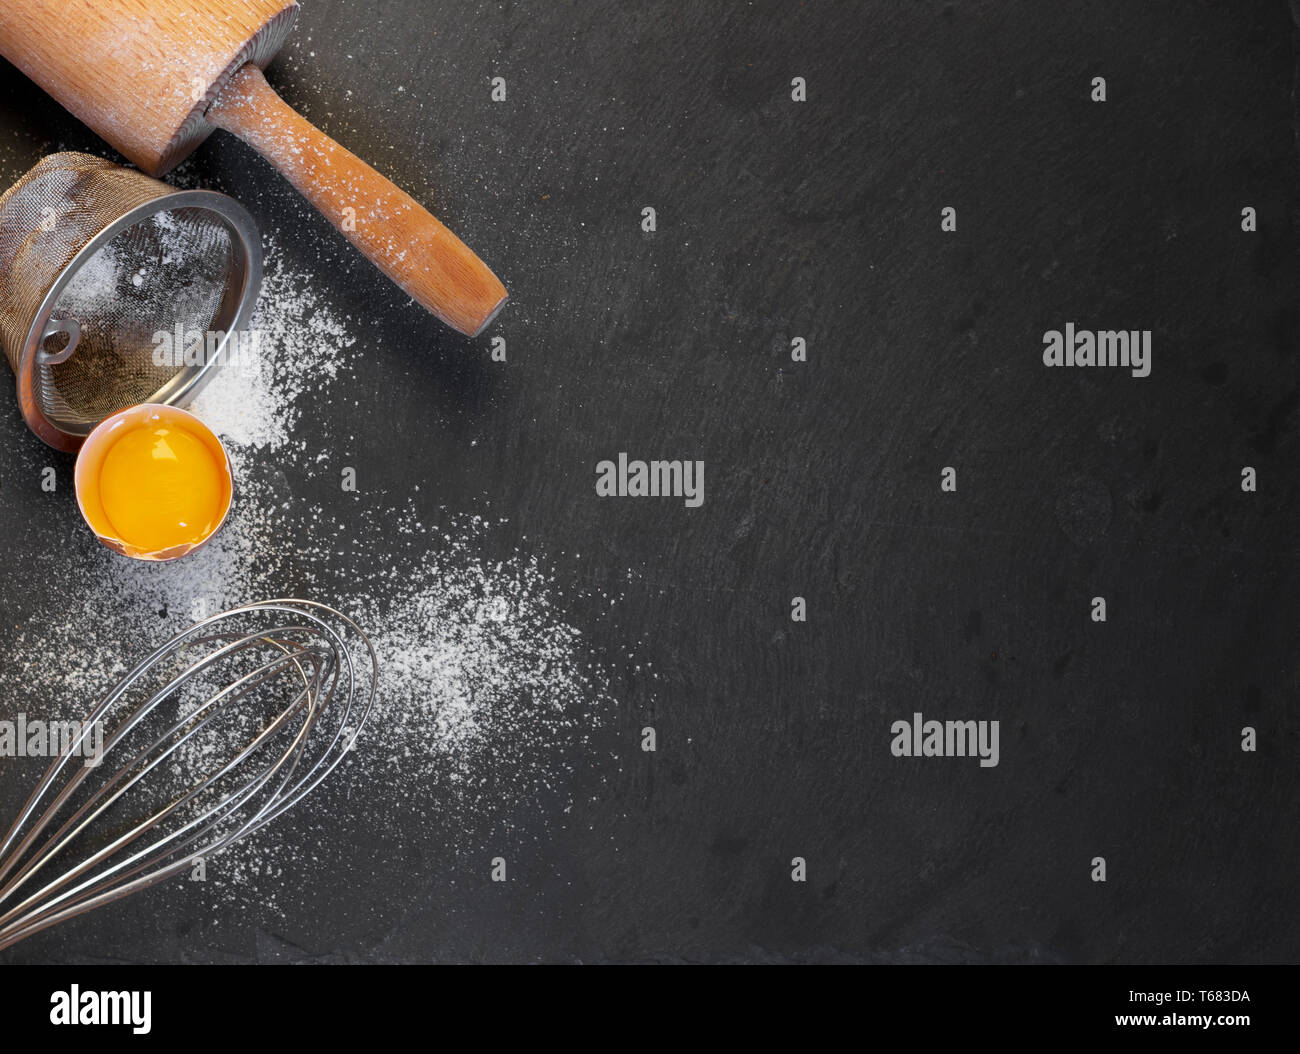 baking ingredients composition Stock Photo